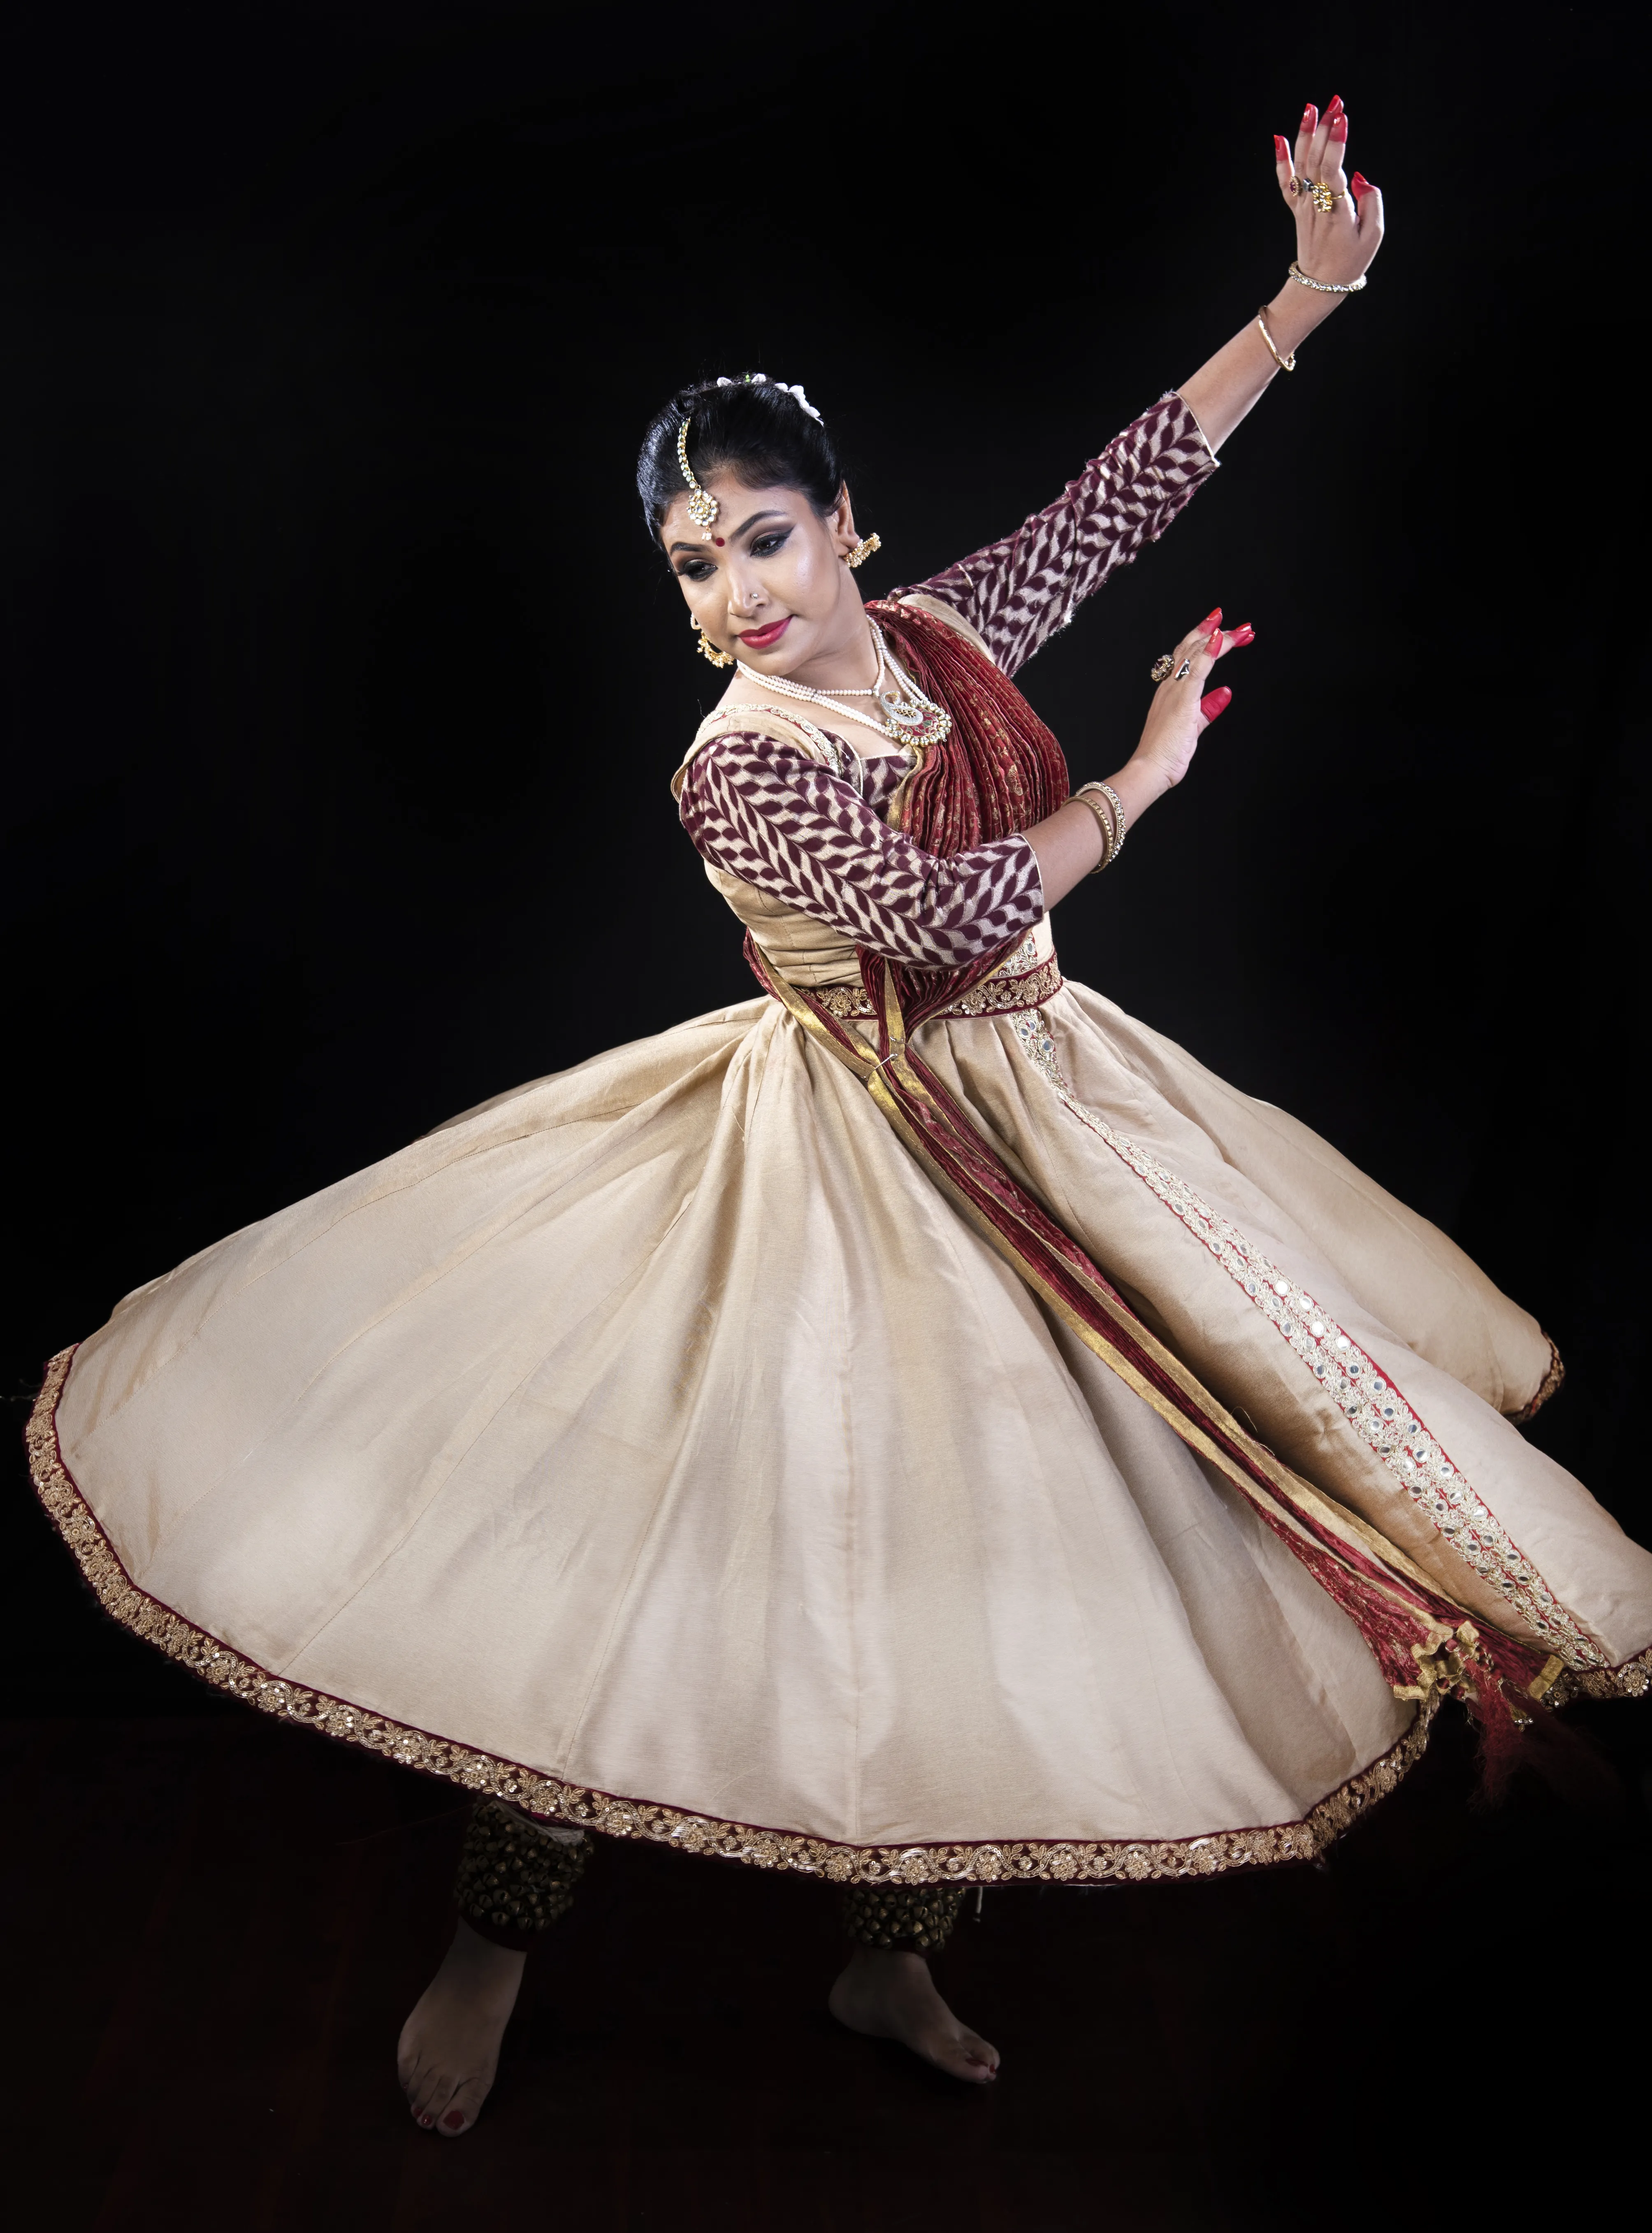 Online kathak classes for beginners with Sangita Chatterjee on ipassio